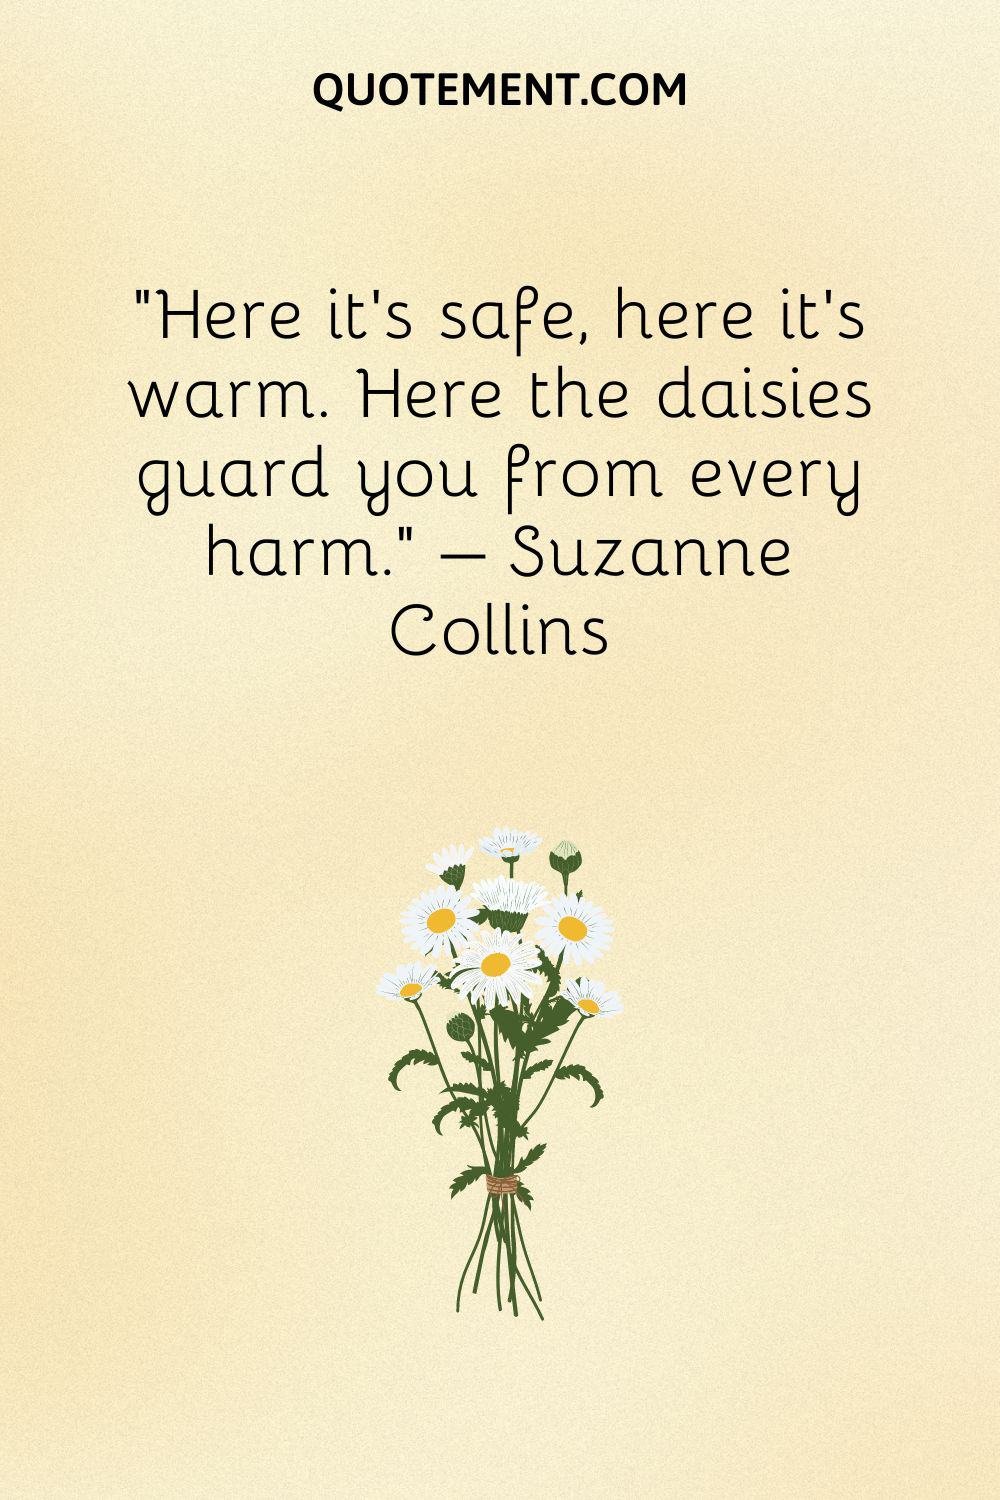 Here it's safe, here it's warm. Here the daisies guard you from every harm